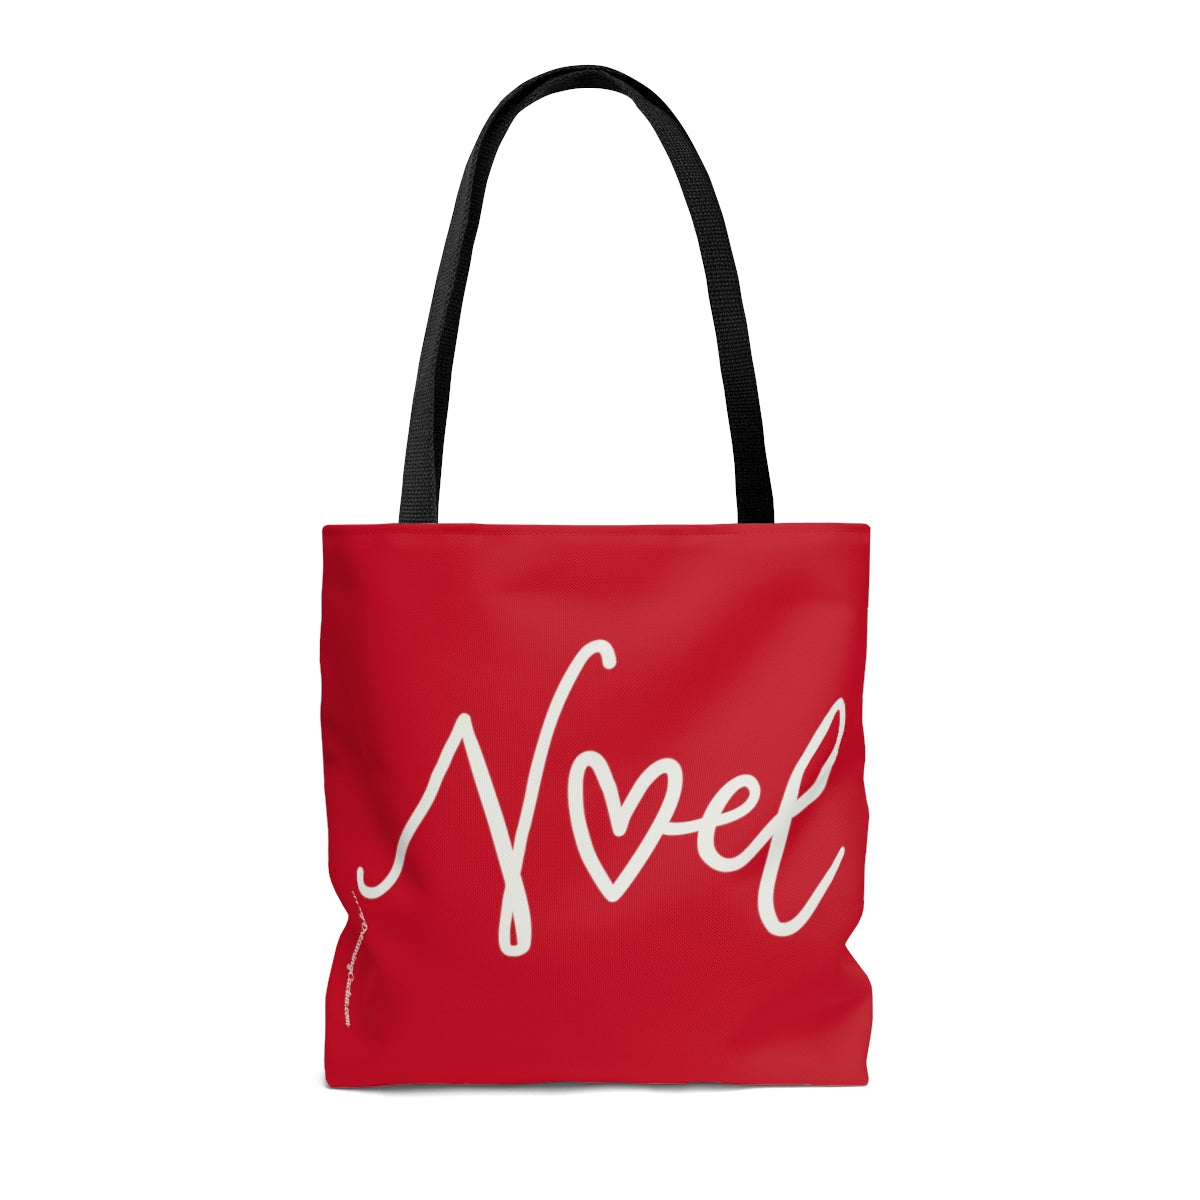 Noel Red Holiday Tote Bag - Travel Grocery Carry-on